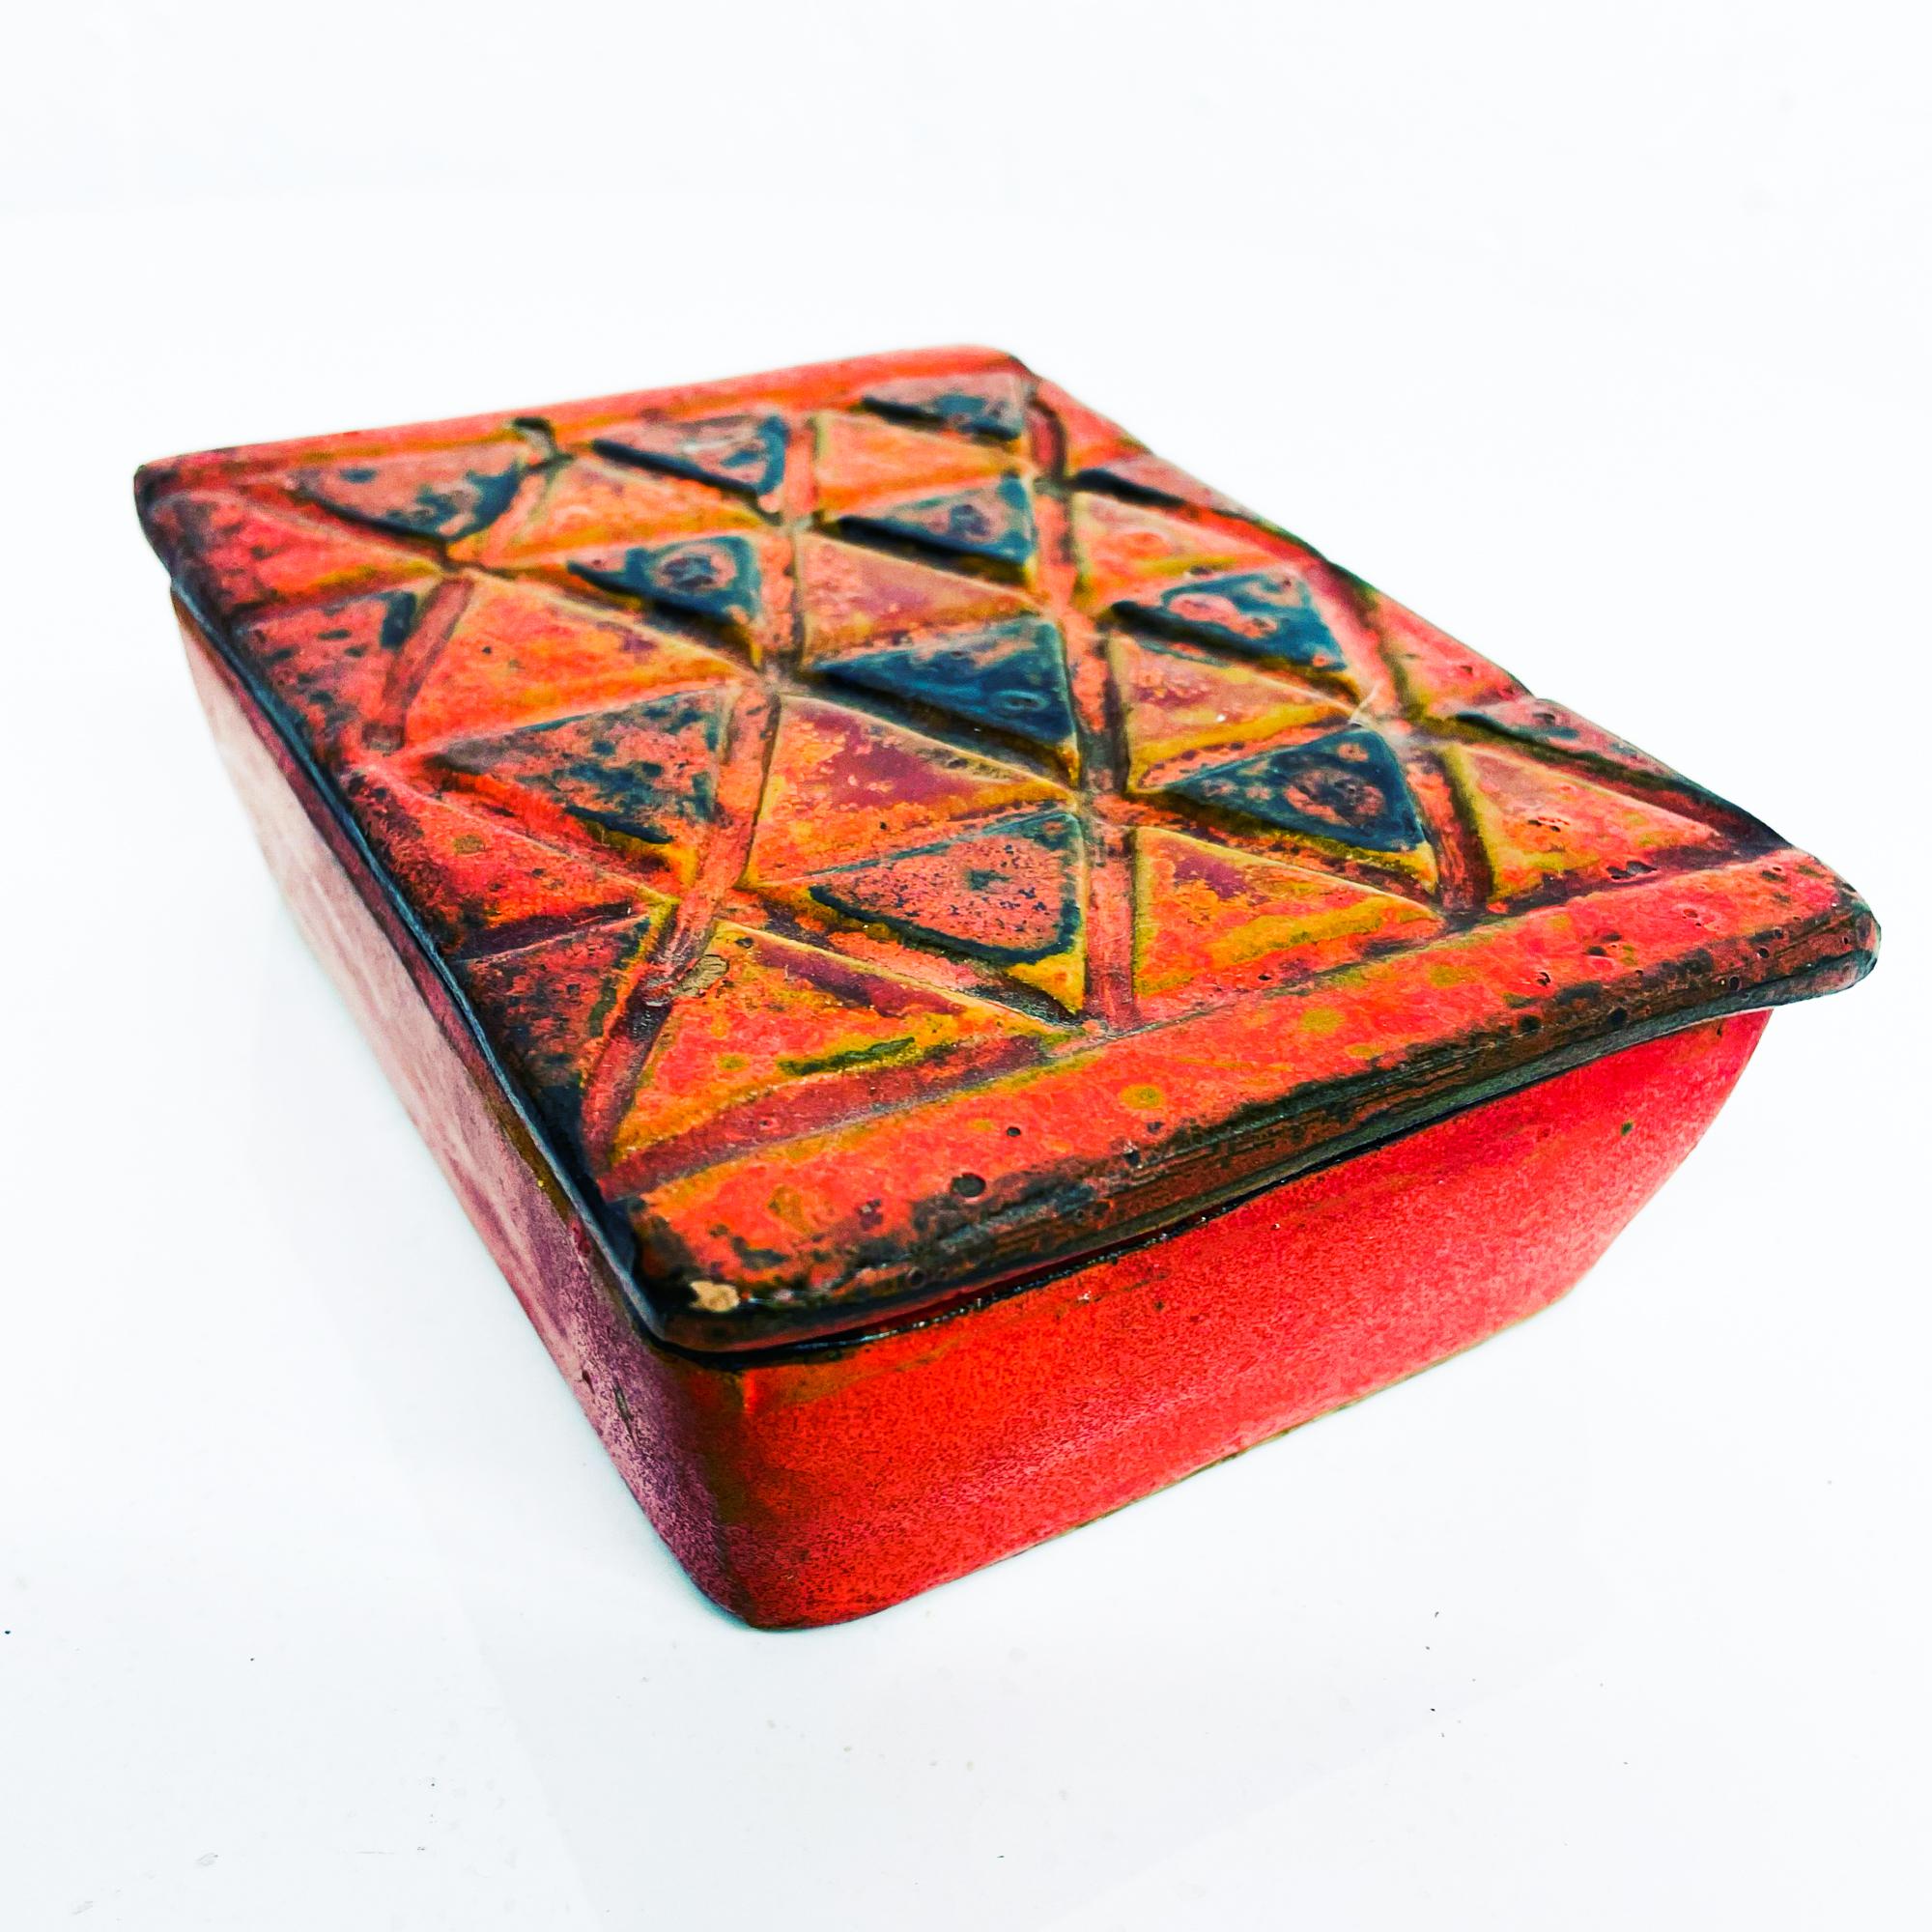 Midcentury Italian Red Black decorative pottery lidded box
Decoration in geometric relief.
attributed Bitossi
Stamped Italy
6 x 4.38 x 2 H inches
Presentation unrestored, original vintage condition
Review all images.




